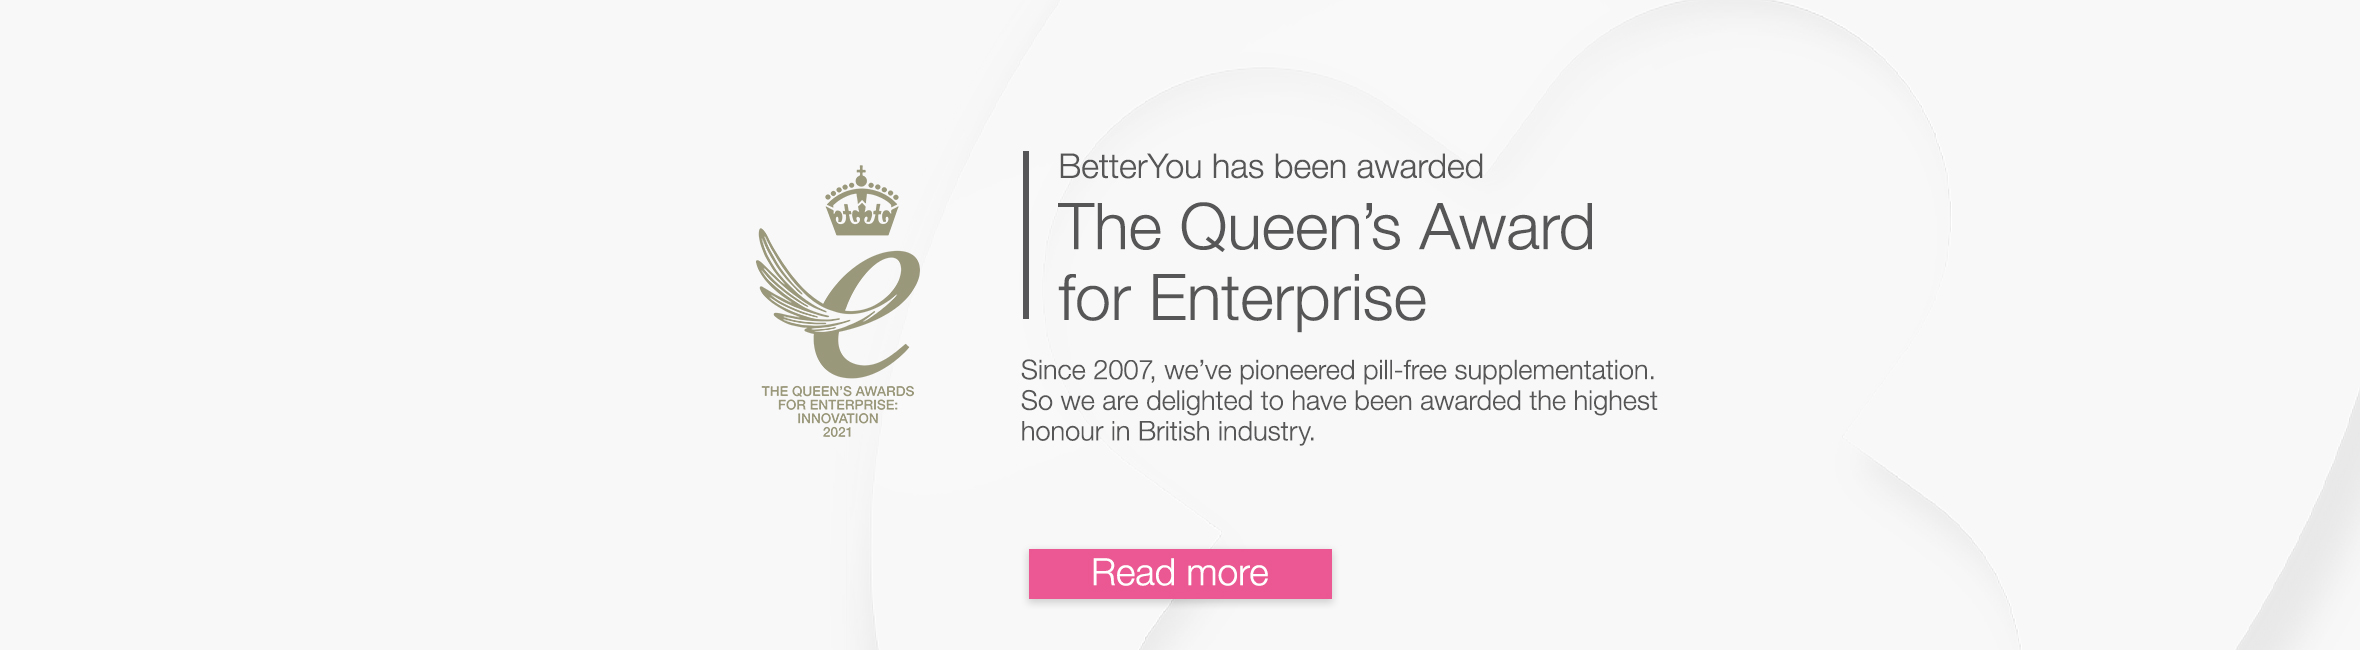 BetterYou has been awarded the Queens Award for Enterprise: Innovation